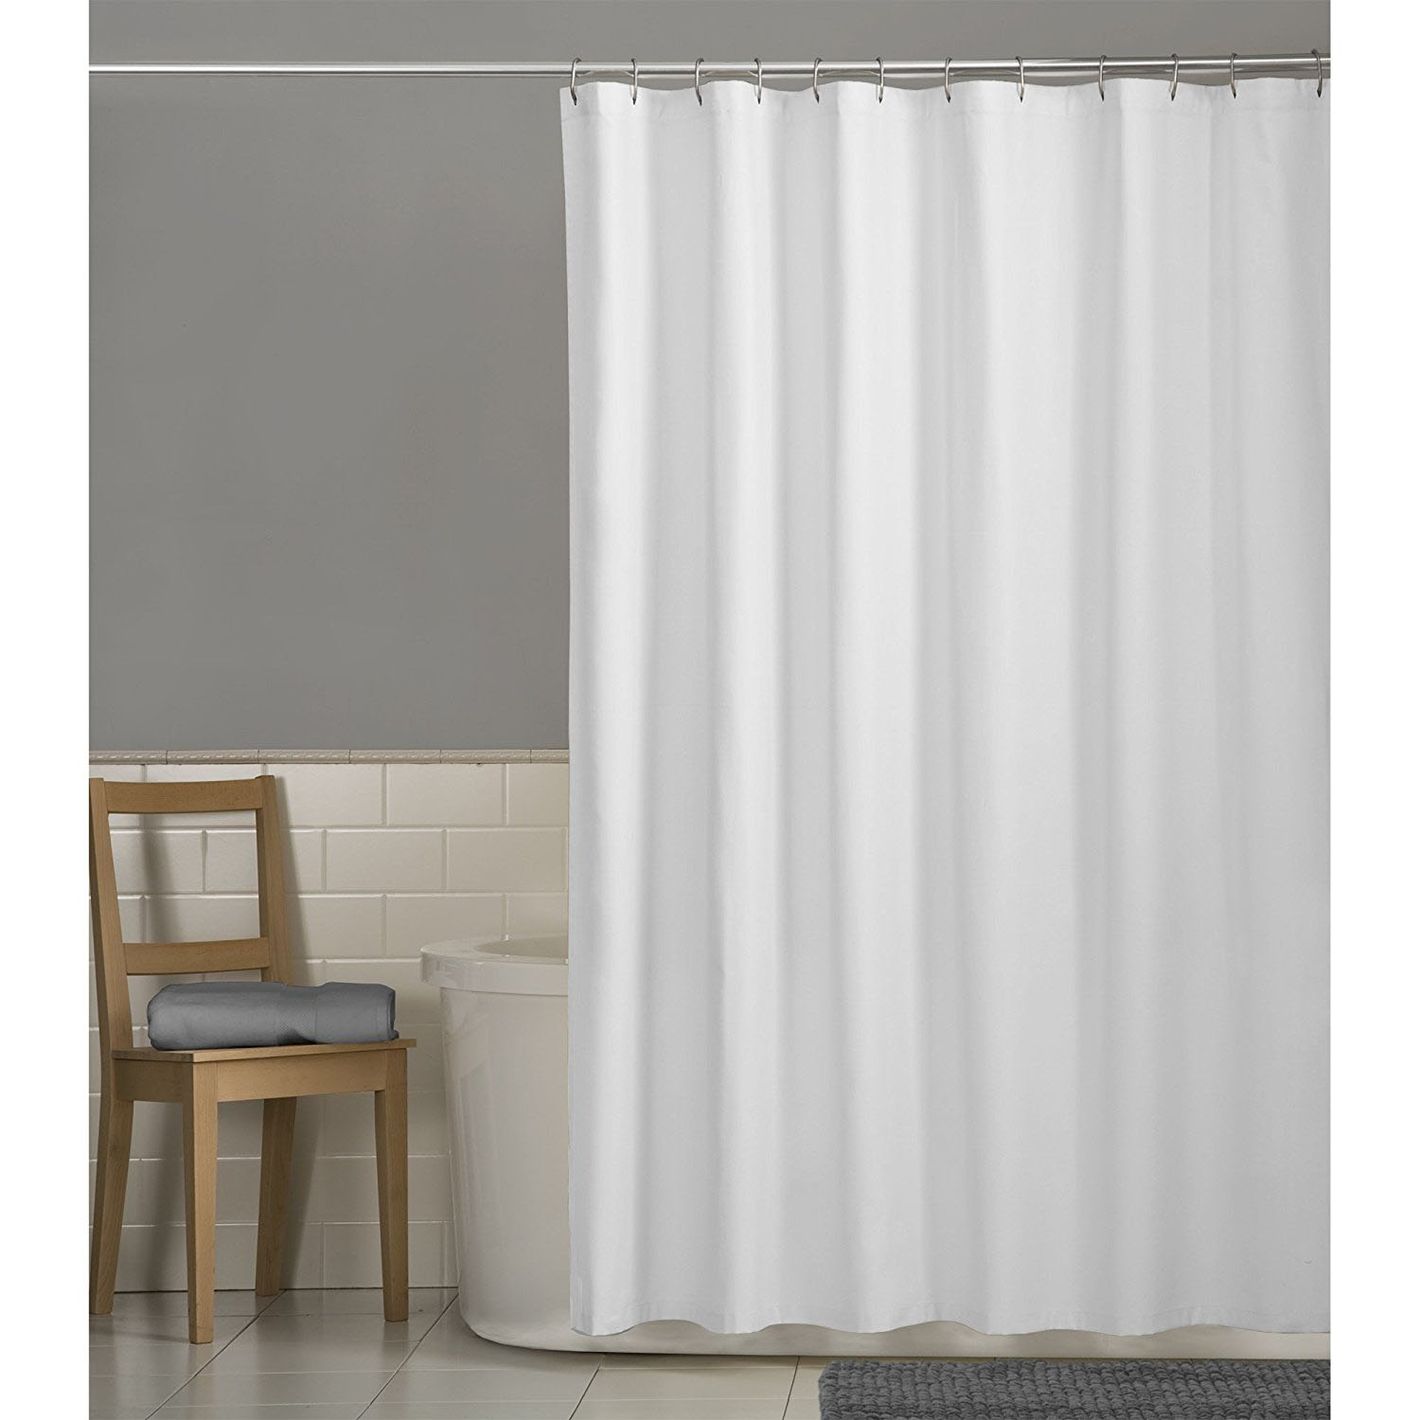 Pics Of Shower Curtains